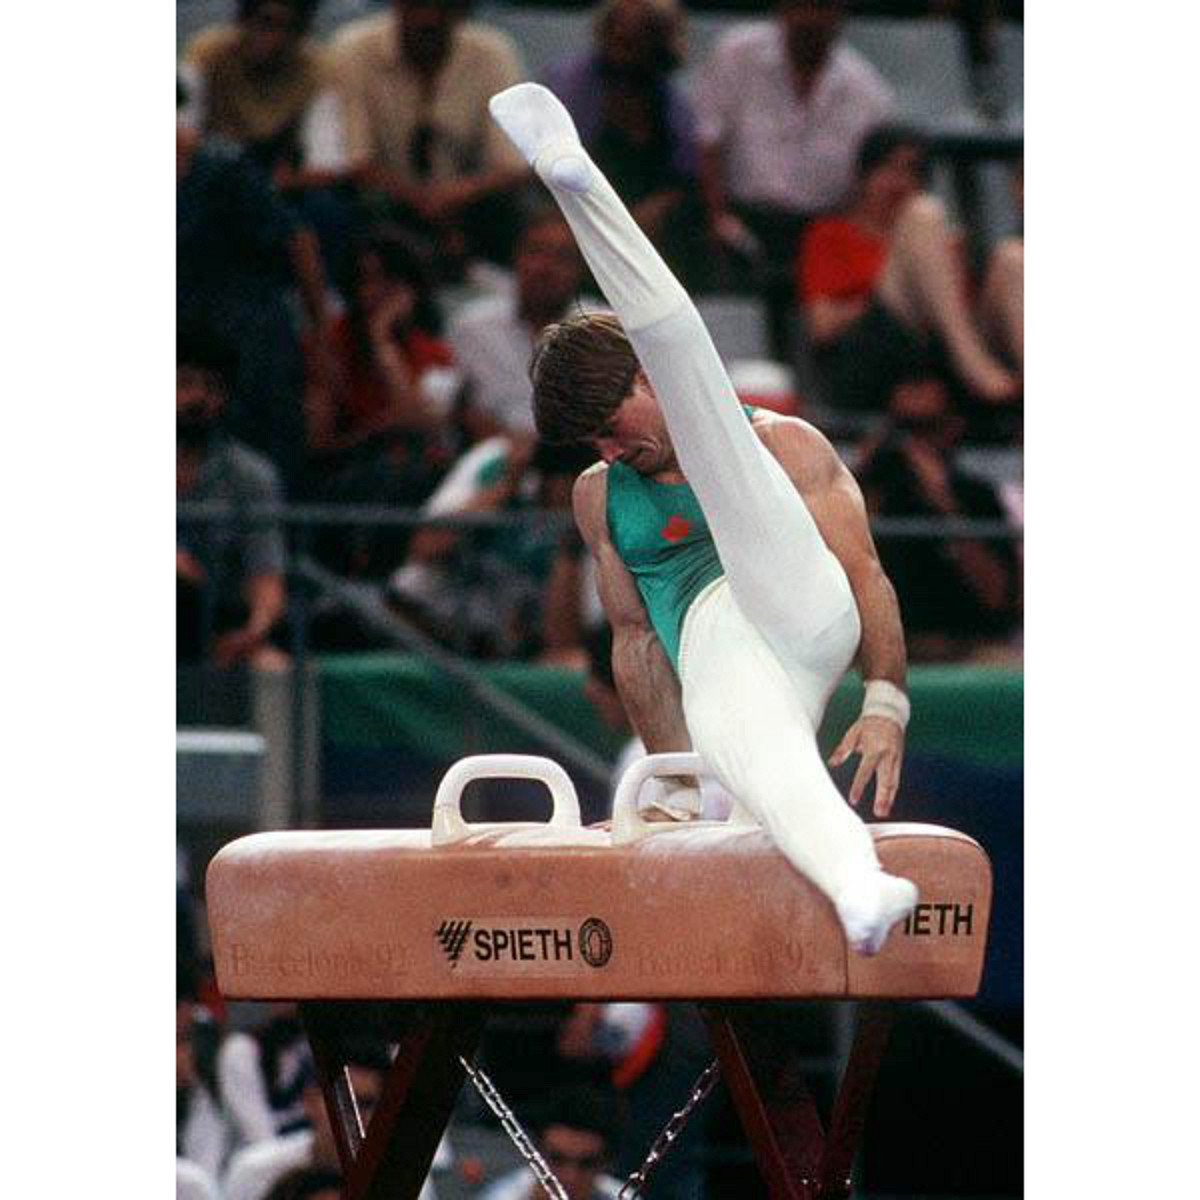 Mike Inglis, Gymworld Owner, performing his routine on the pommel horse at Barcelona Olympics in 1992